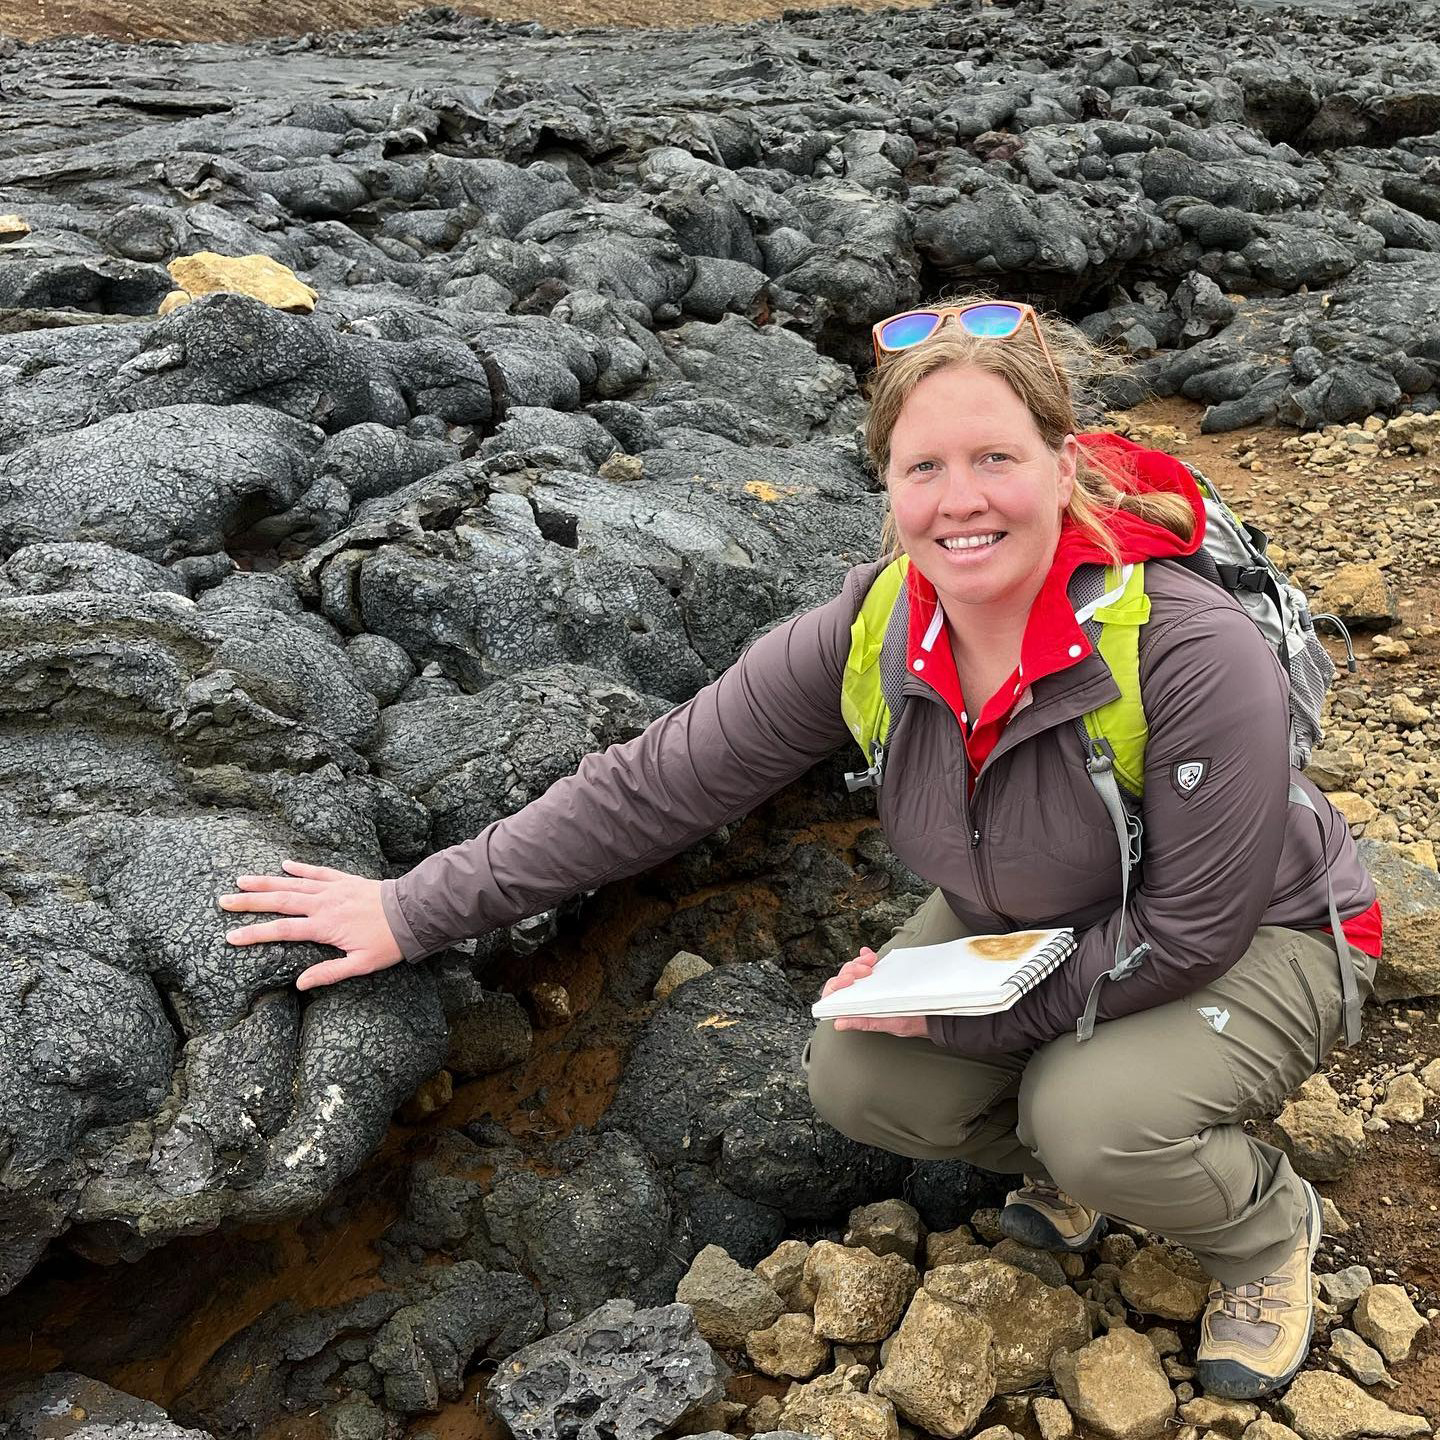 Becky Young, assistant professor of agronomy and horticulture, is co-leading the study abroad class GEOG 497/897 - Geography Field Tour of Iceland.